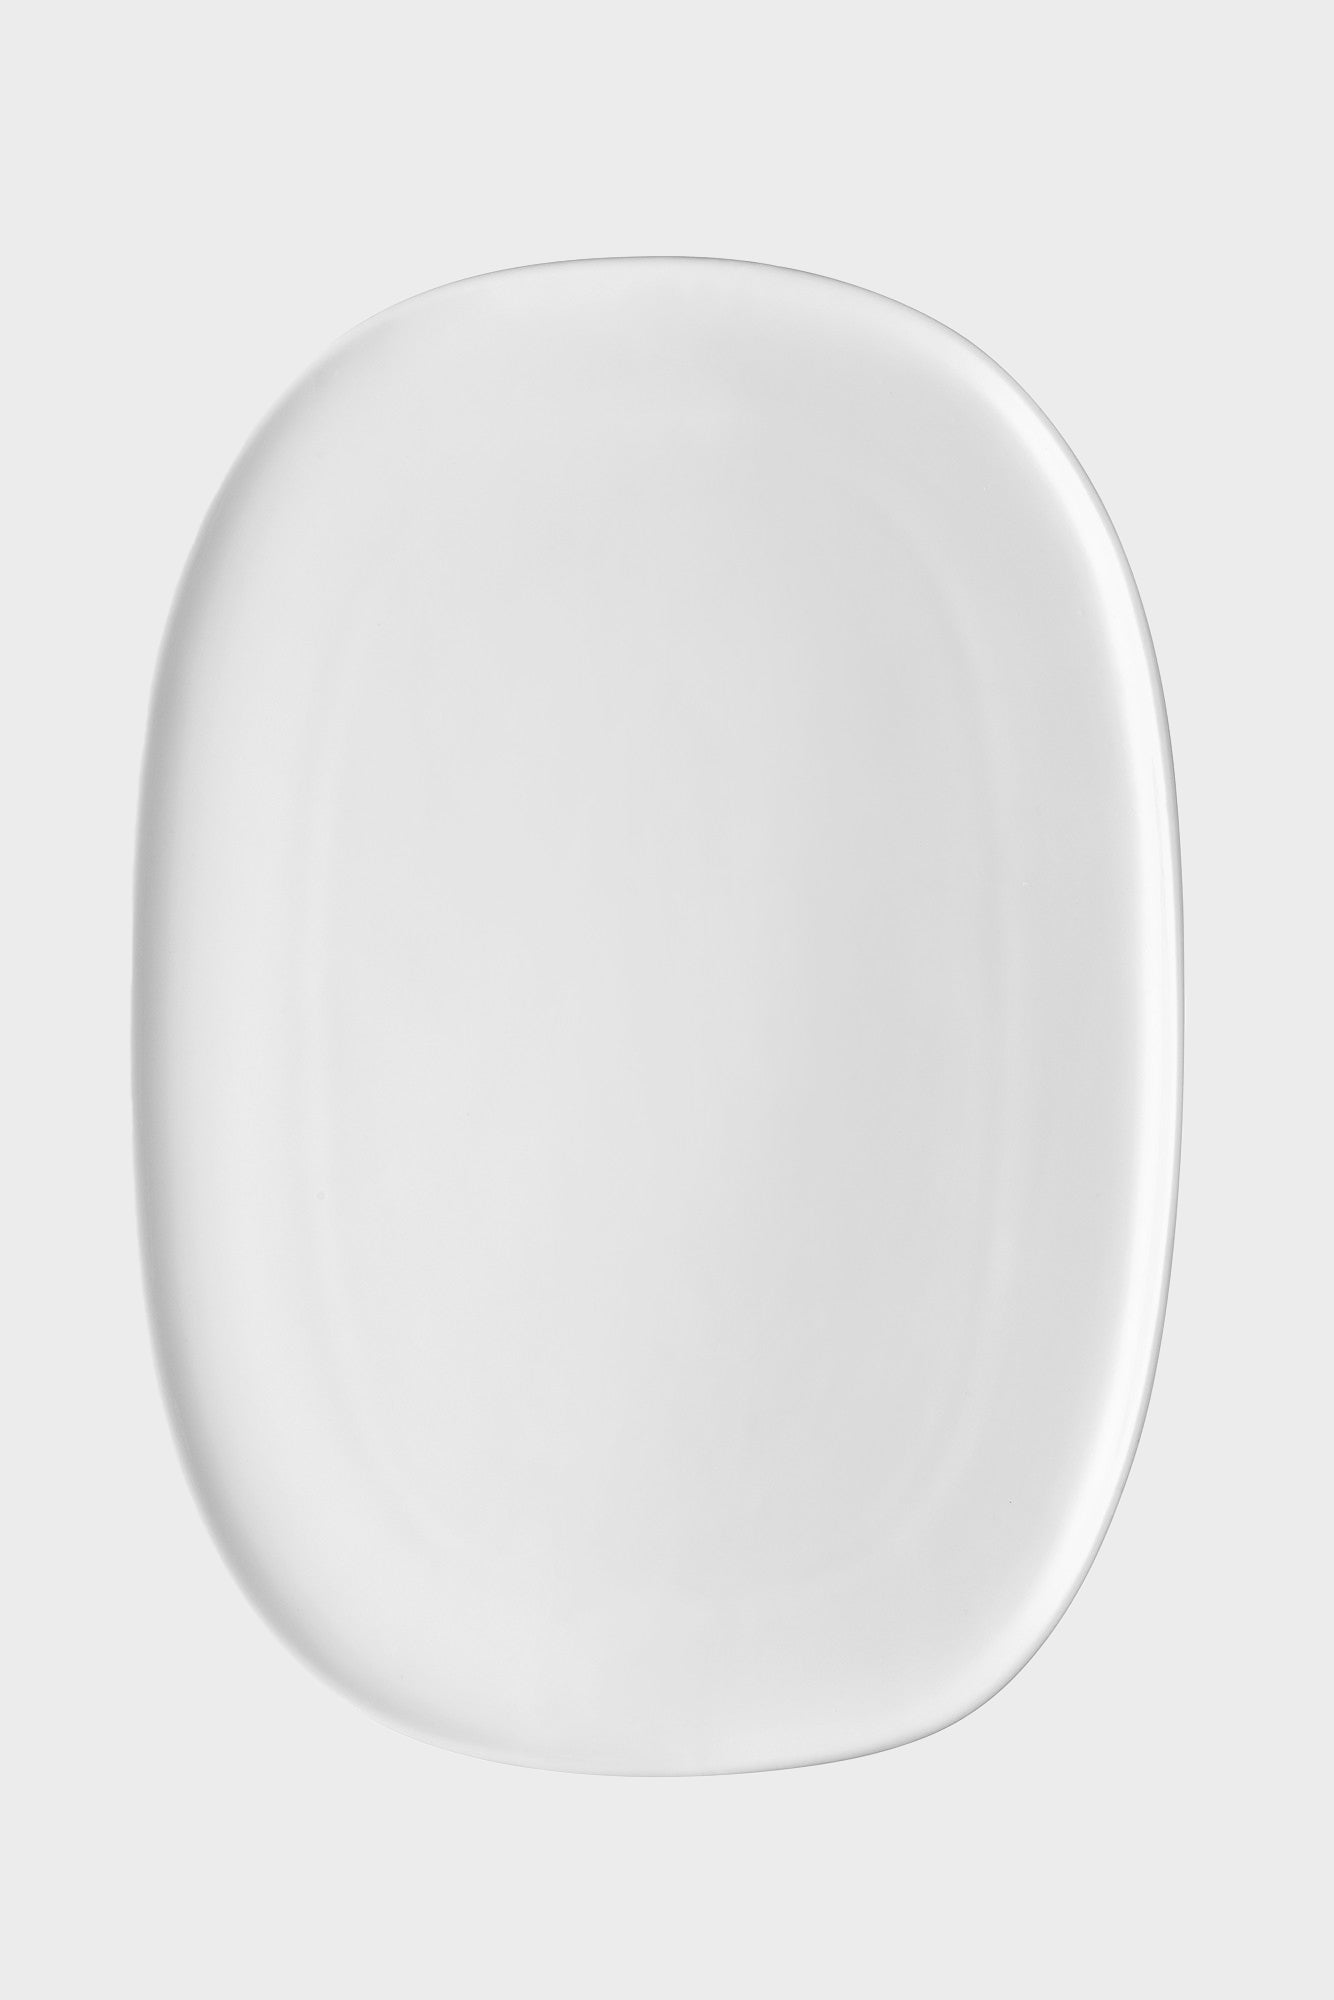 Itsumo oval serving plate 36cm-Alessi-KIOSK48TH